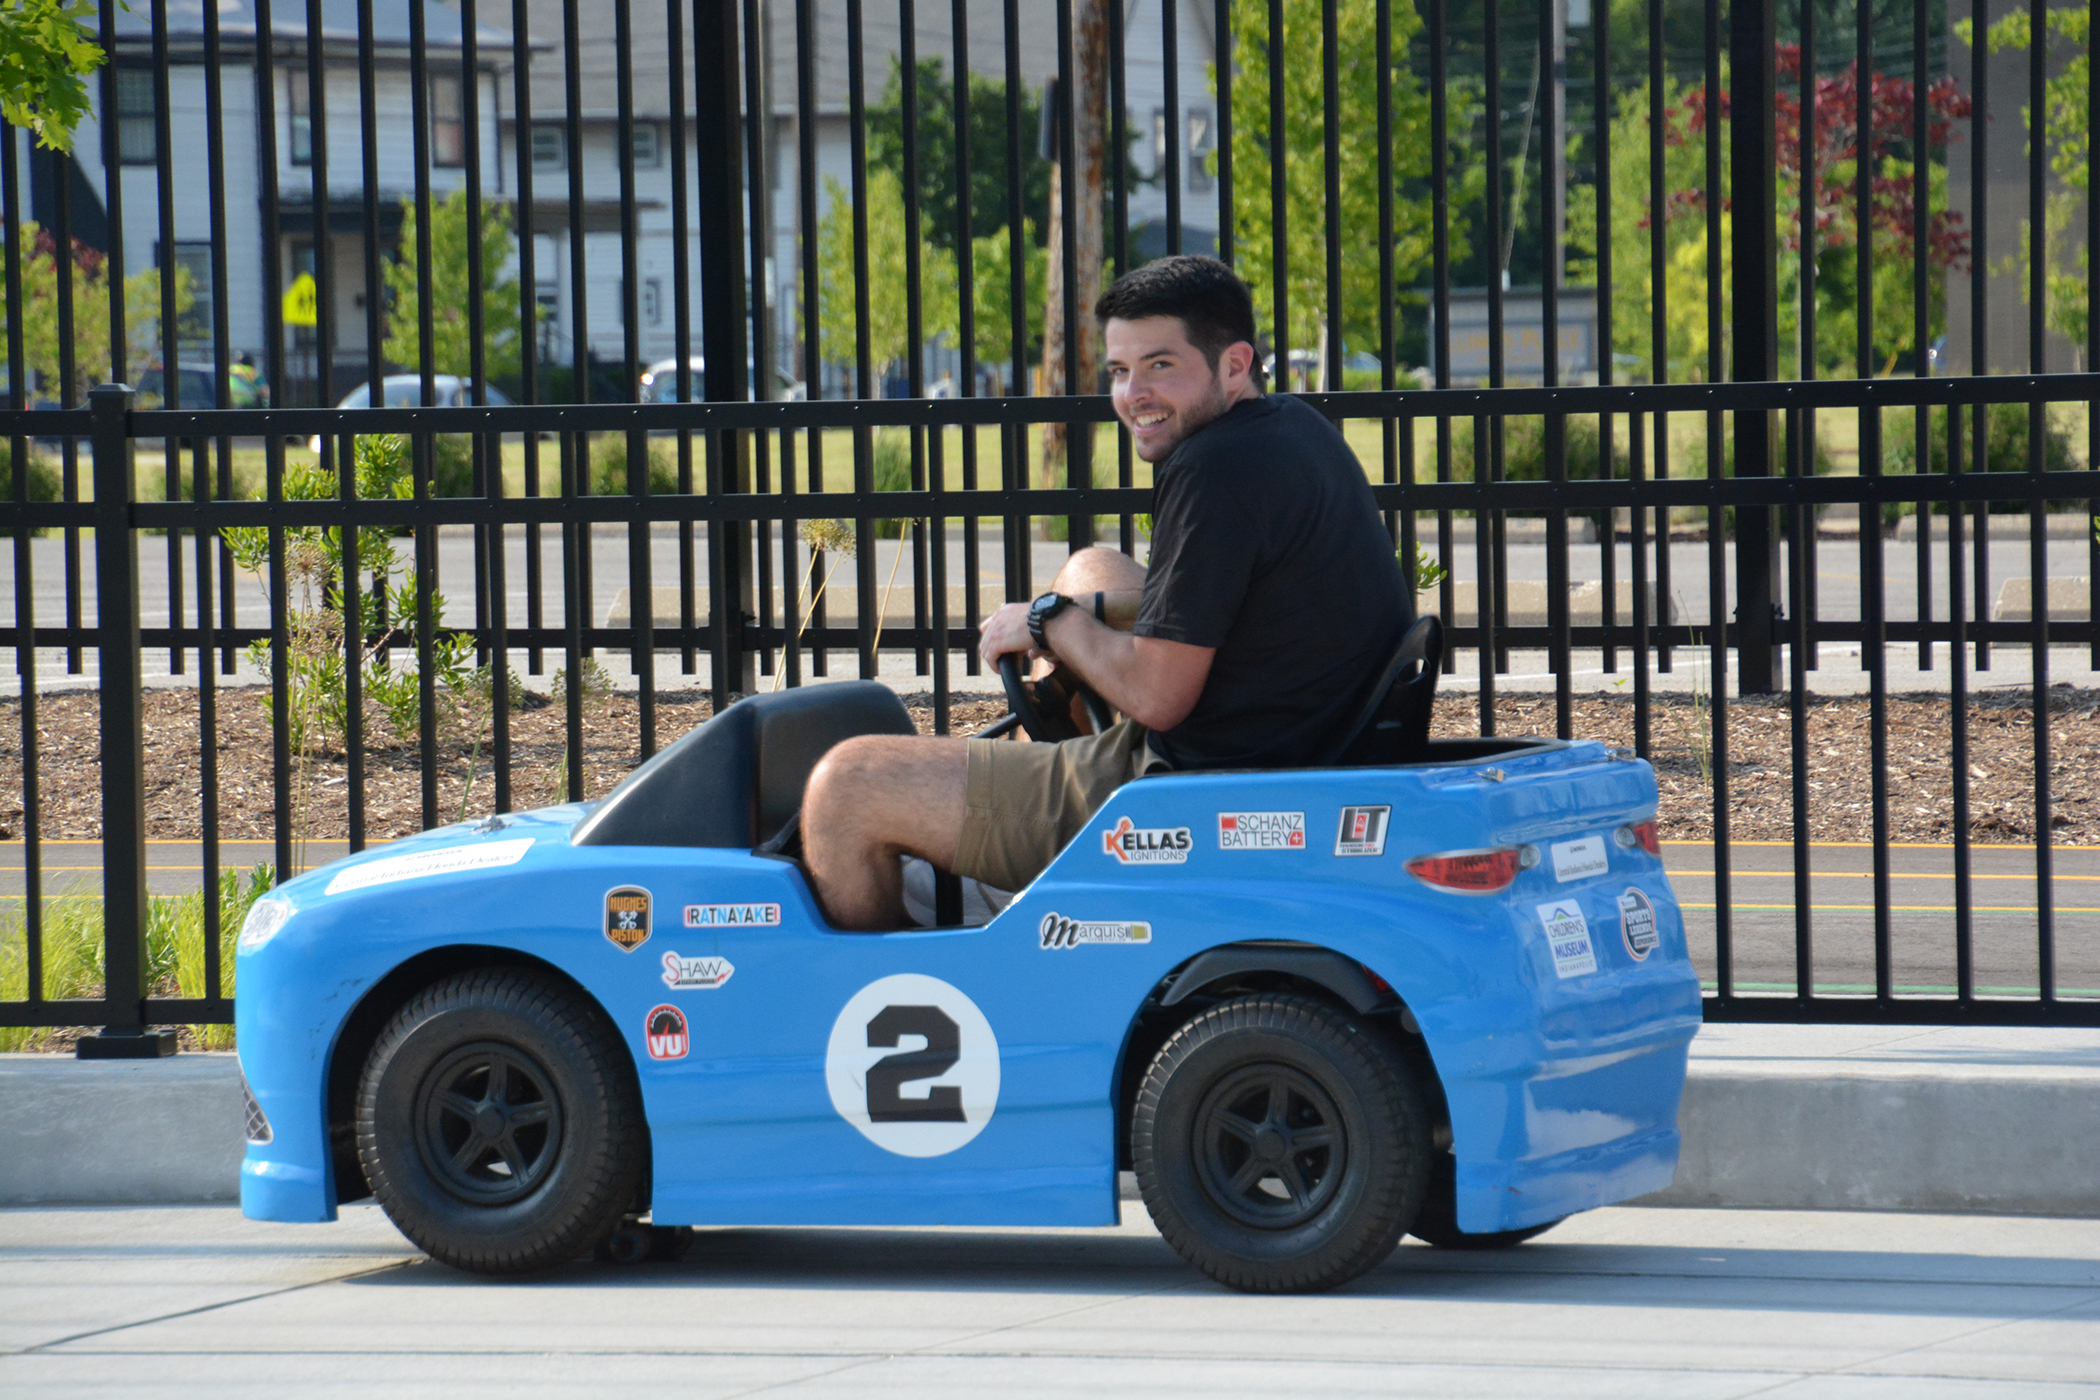 Kids and kids-at-heart love racing pedal cars